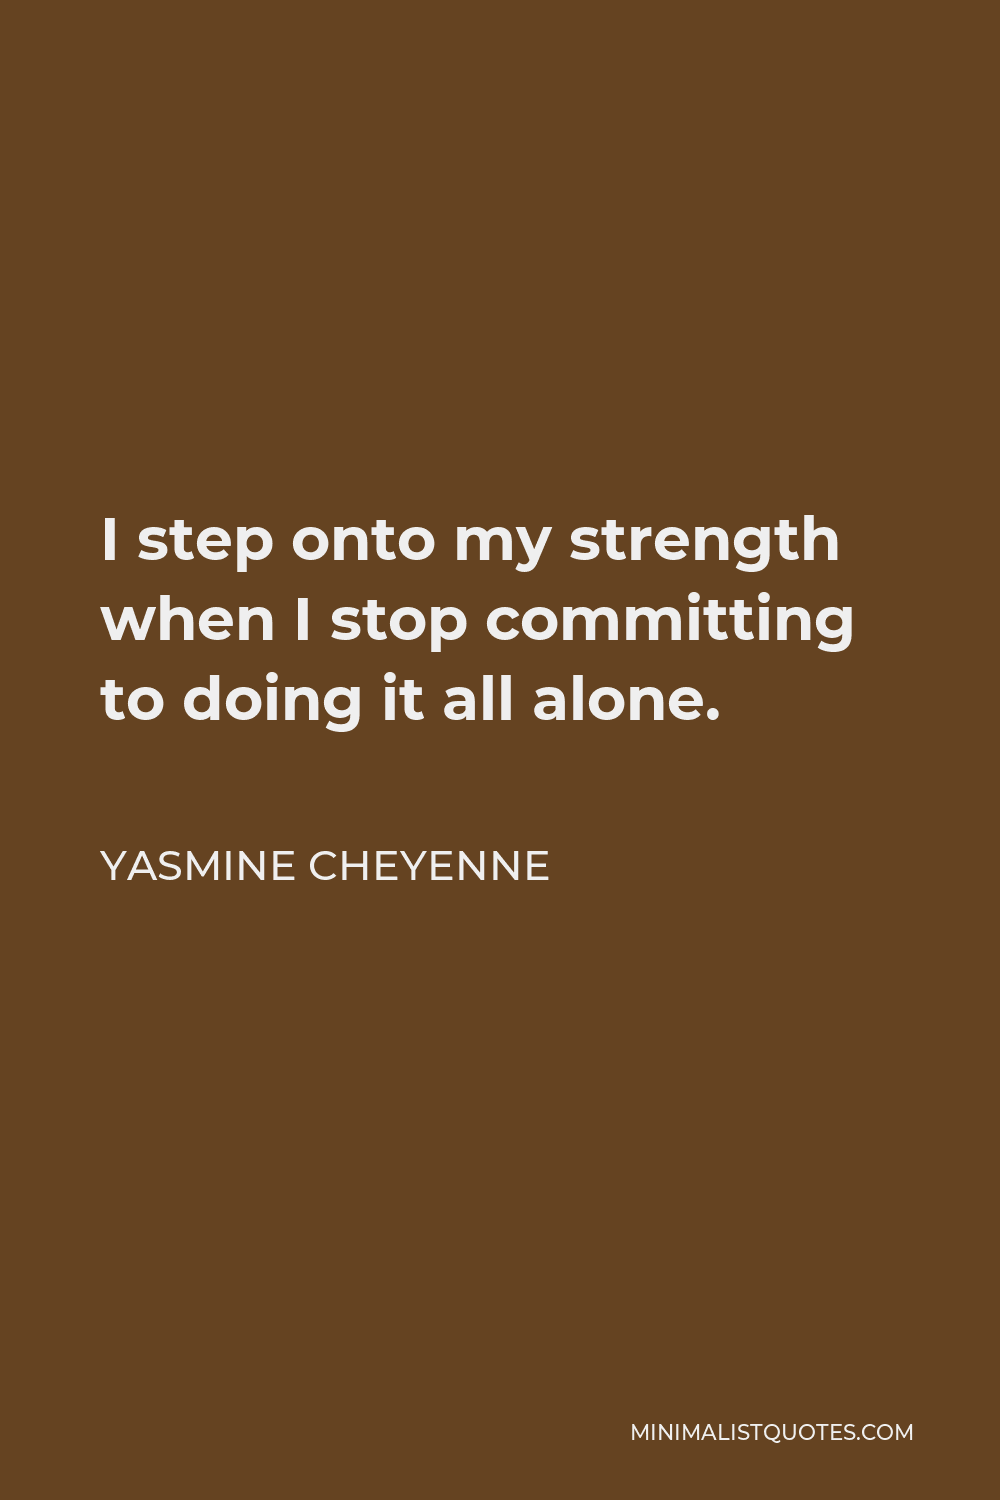 Yasmine Cheyenne Quote - I step onto my strength when I stop committing to doing it all alone.